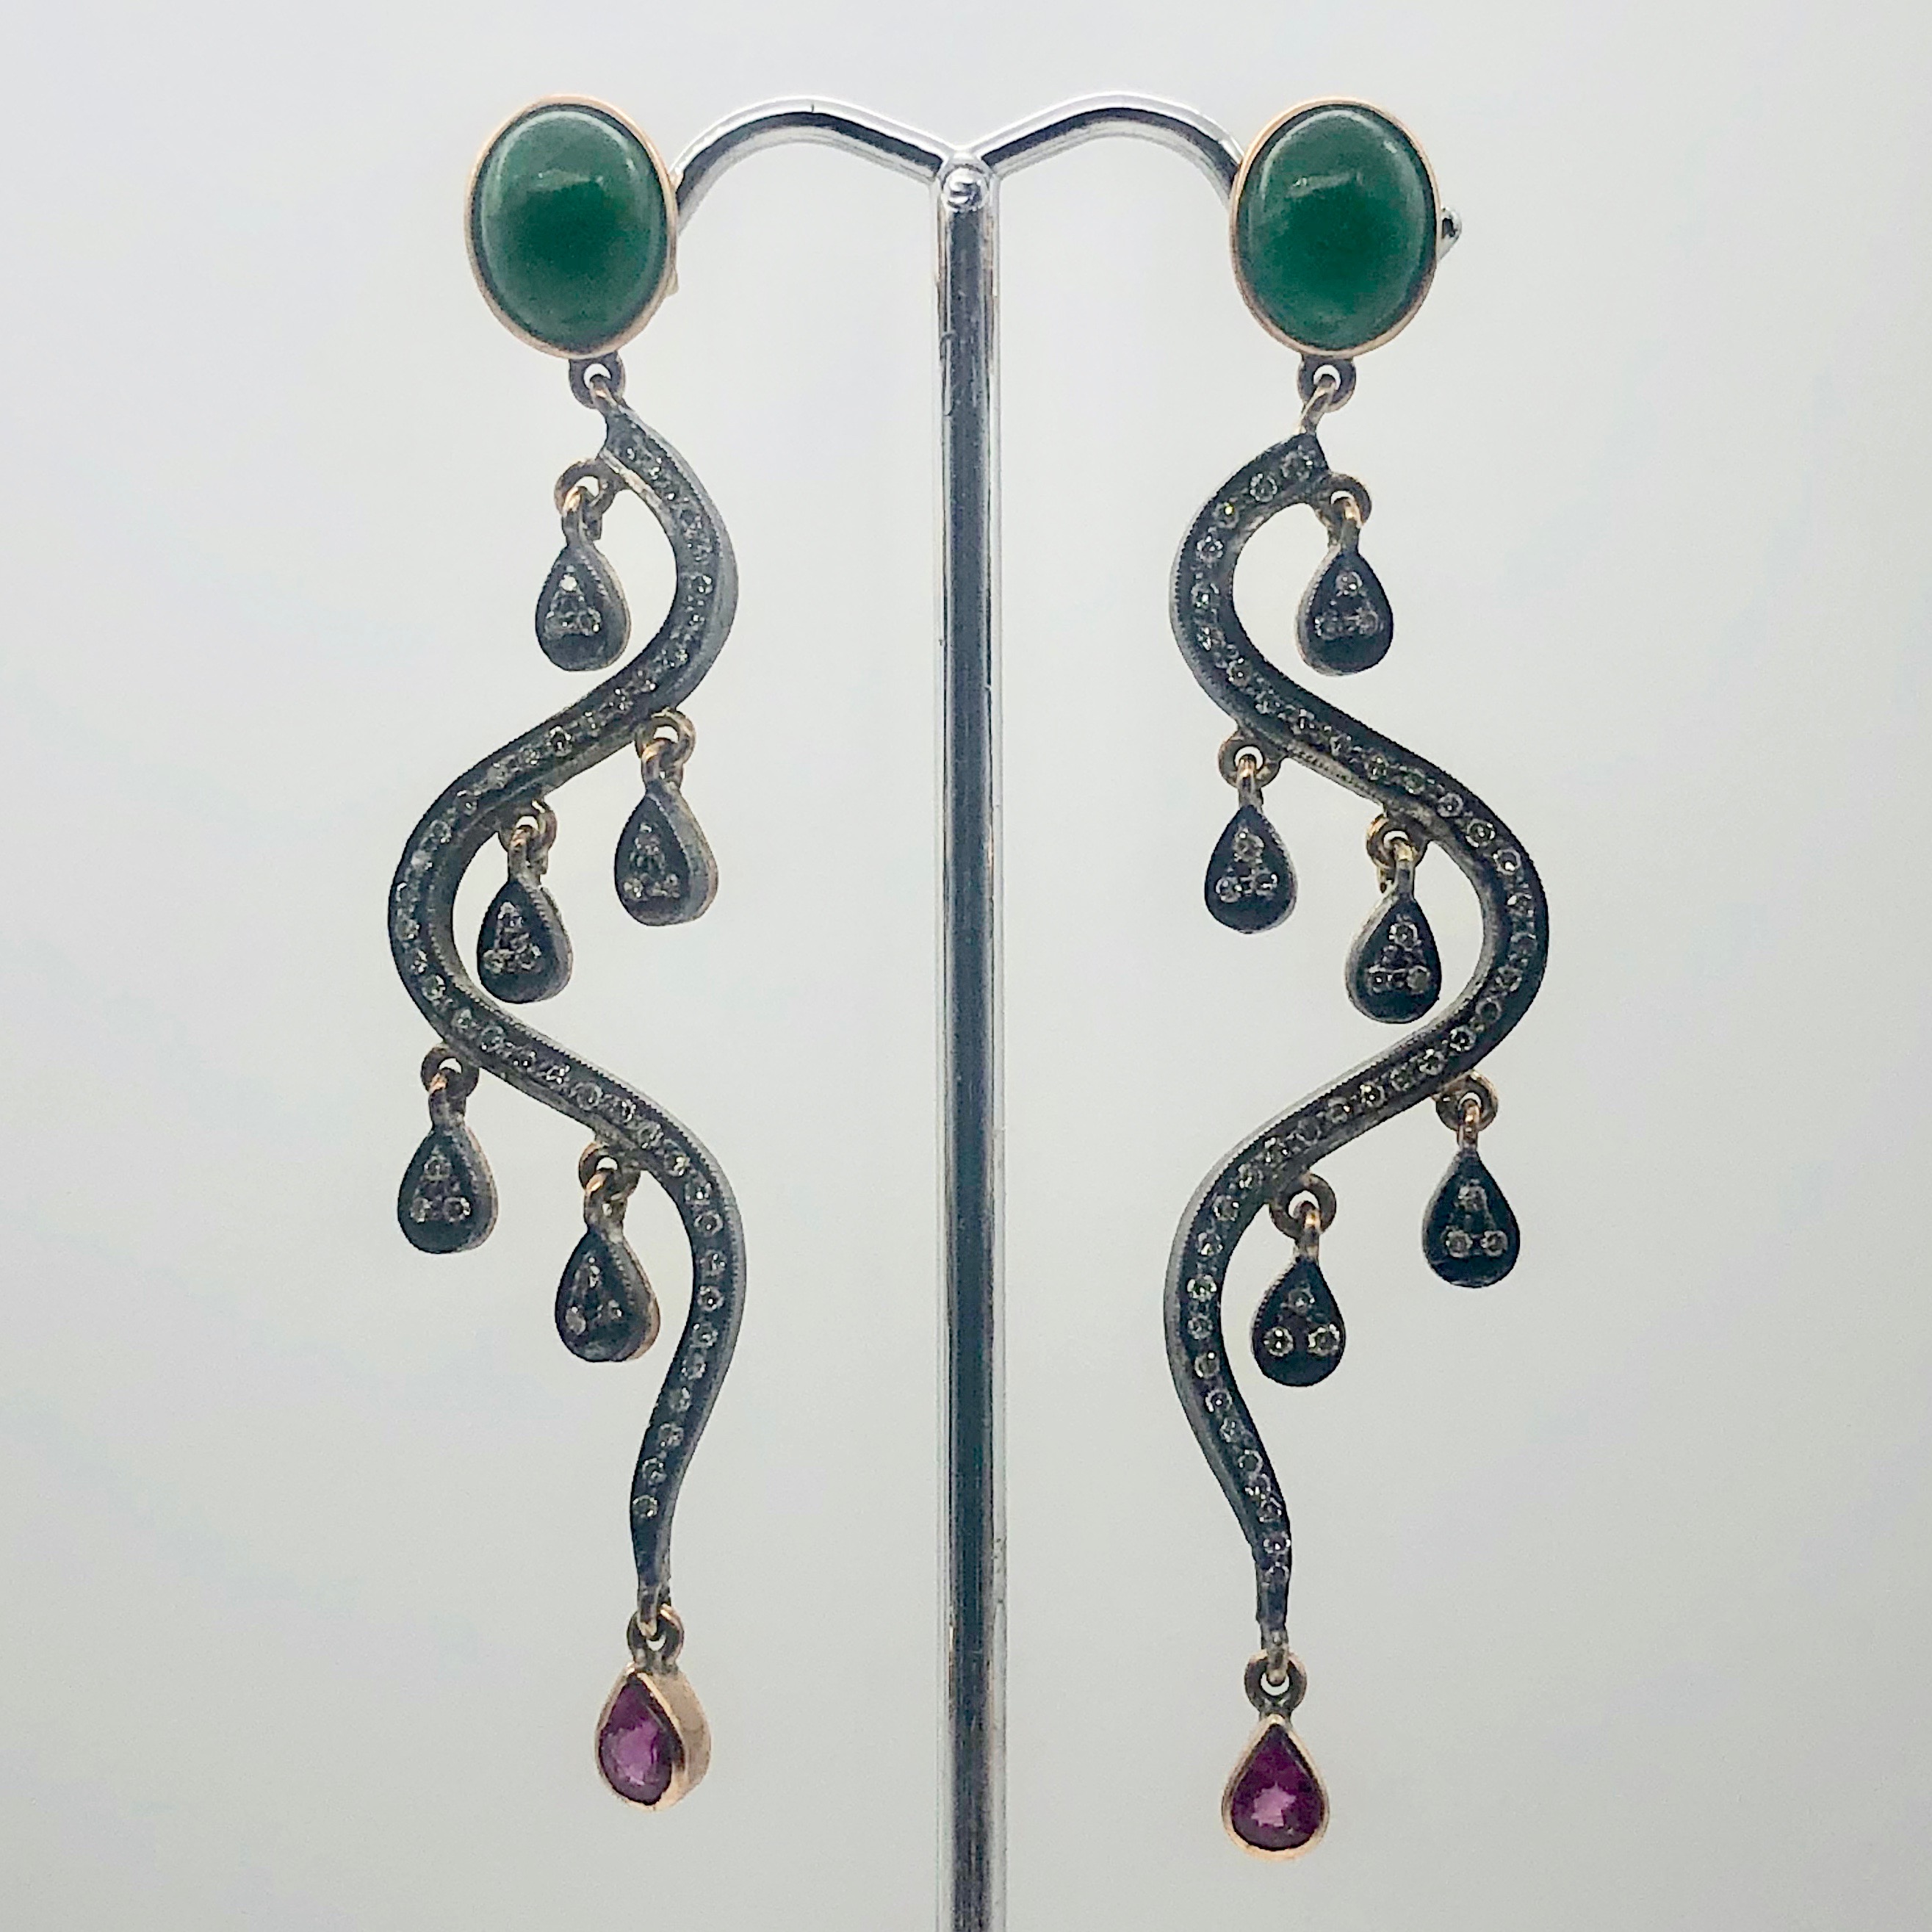 18Kt Gold Earrings Dripping W/ 108 Diamonds Pink Sapphire Emerald | 2.75 inches| - image 1 of 10